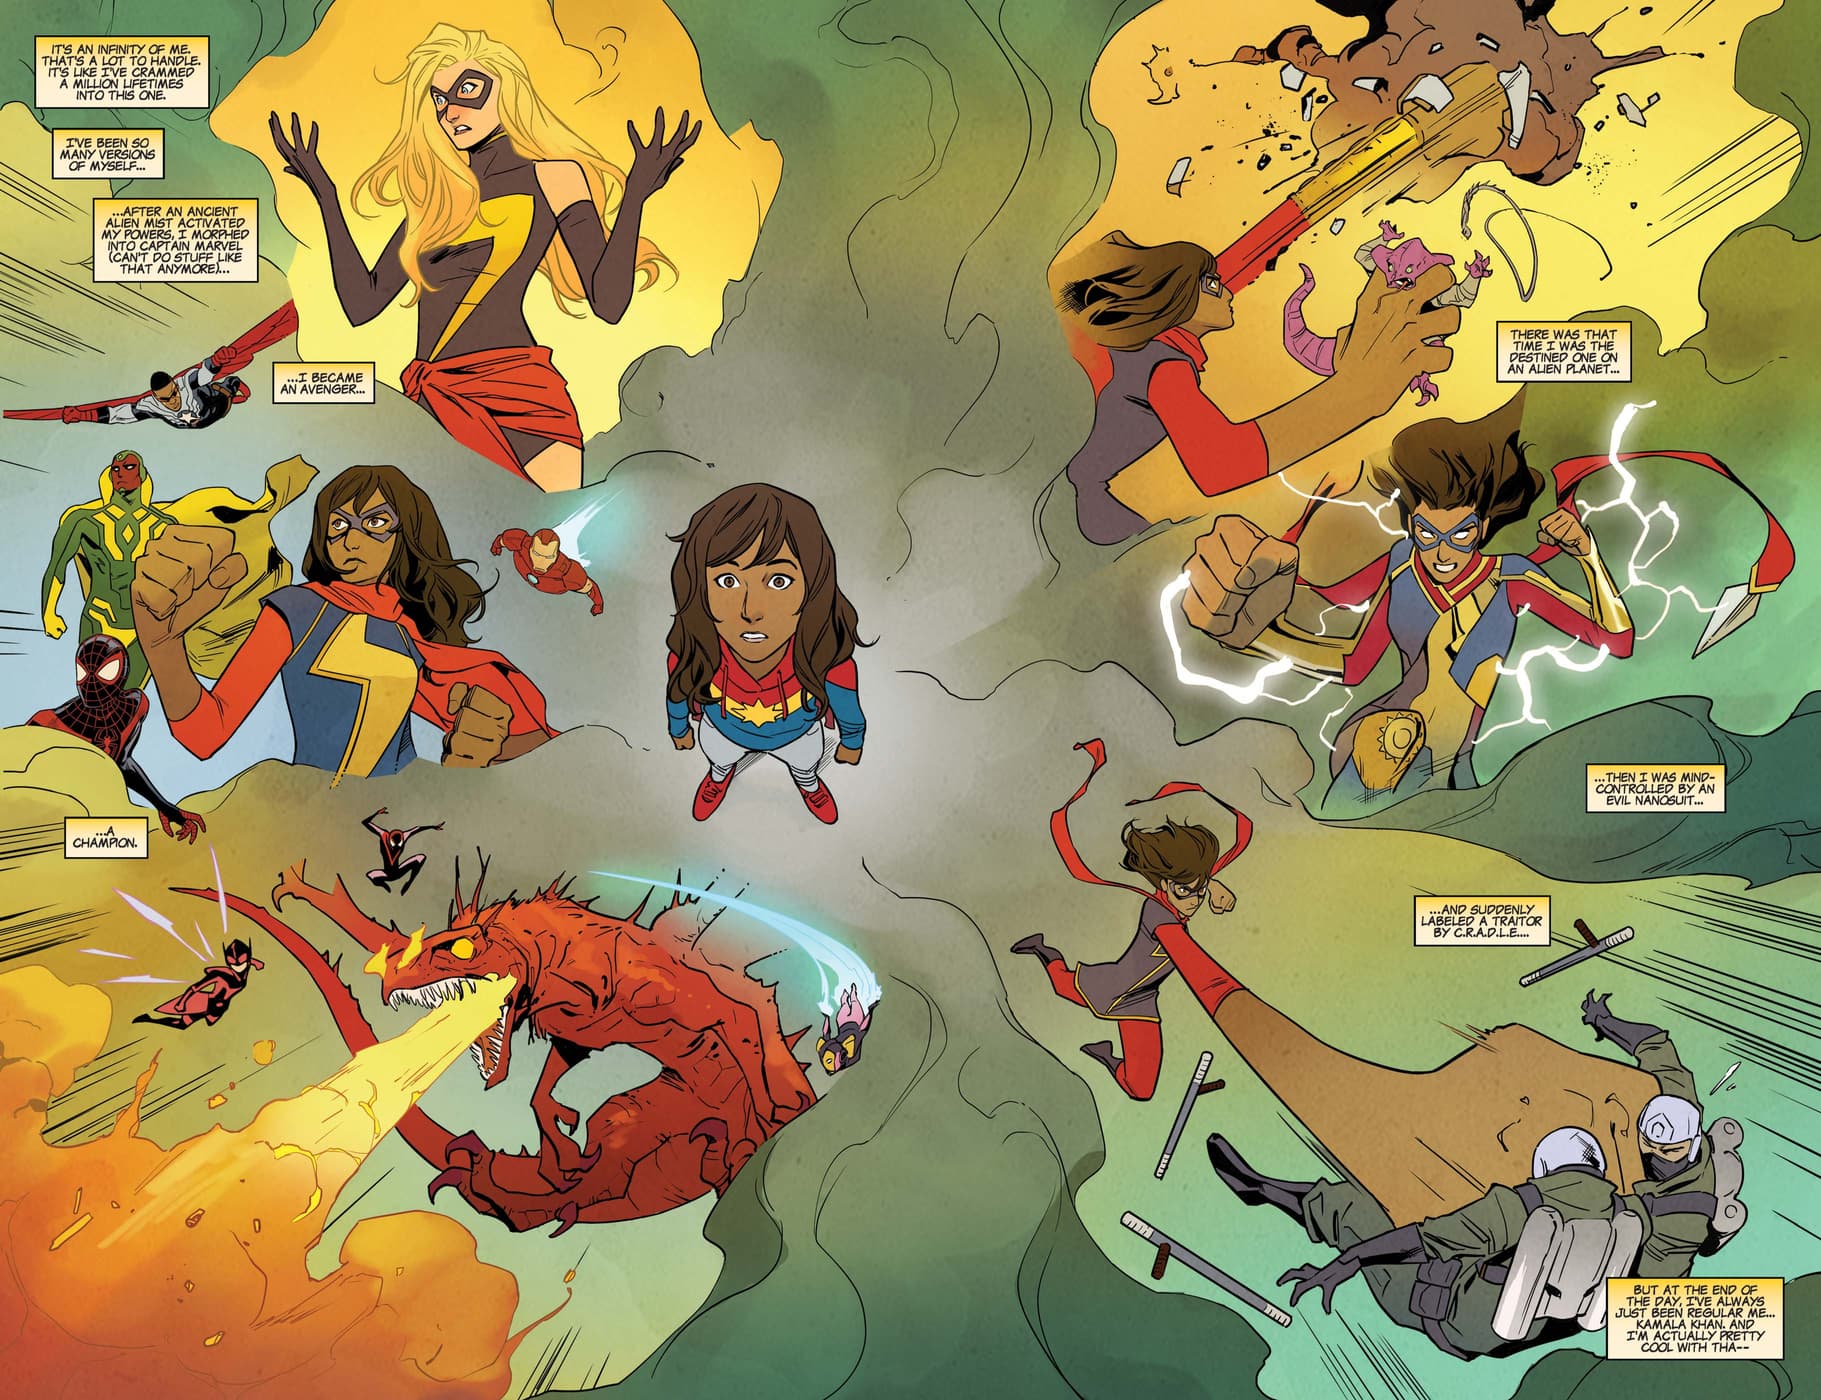 MS. MARVEL: BEYOND THE LIMIT (2021) #1 interior art by Andres Genolet and Triona Farrell